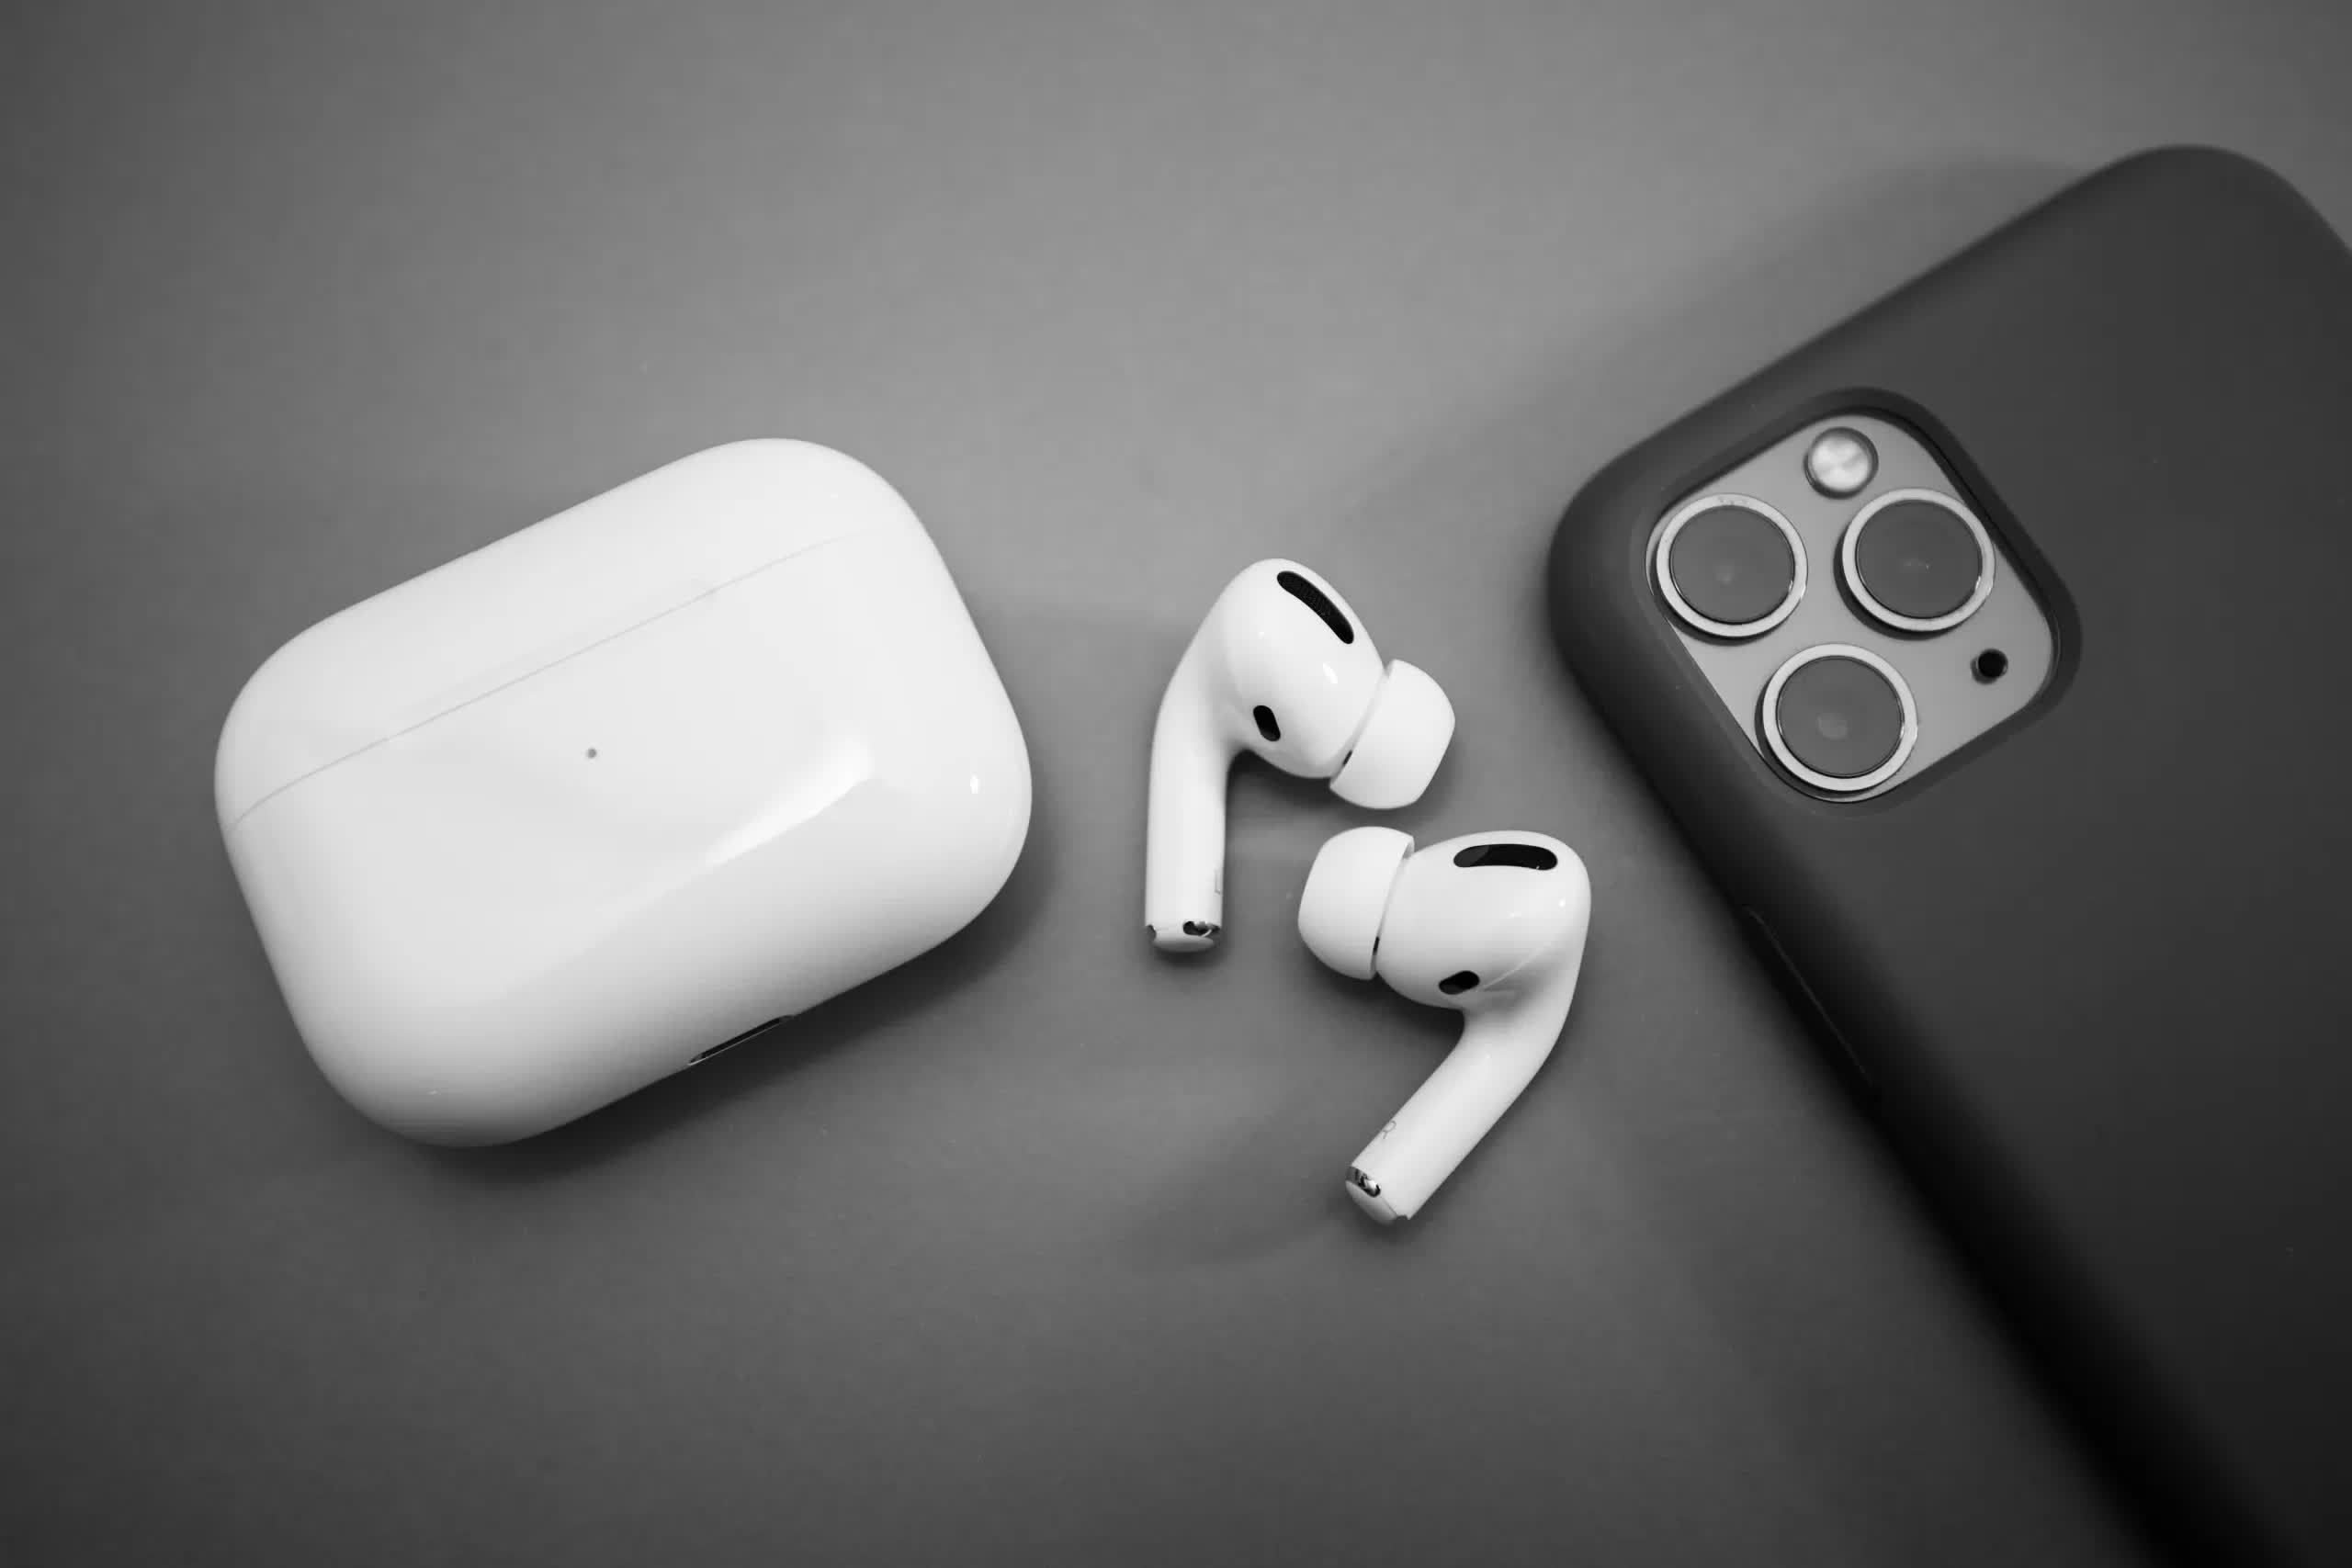 Don't sleep with your AirPods – you could end up swallowing them